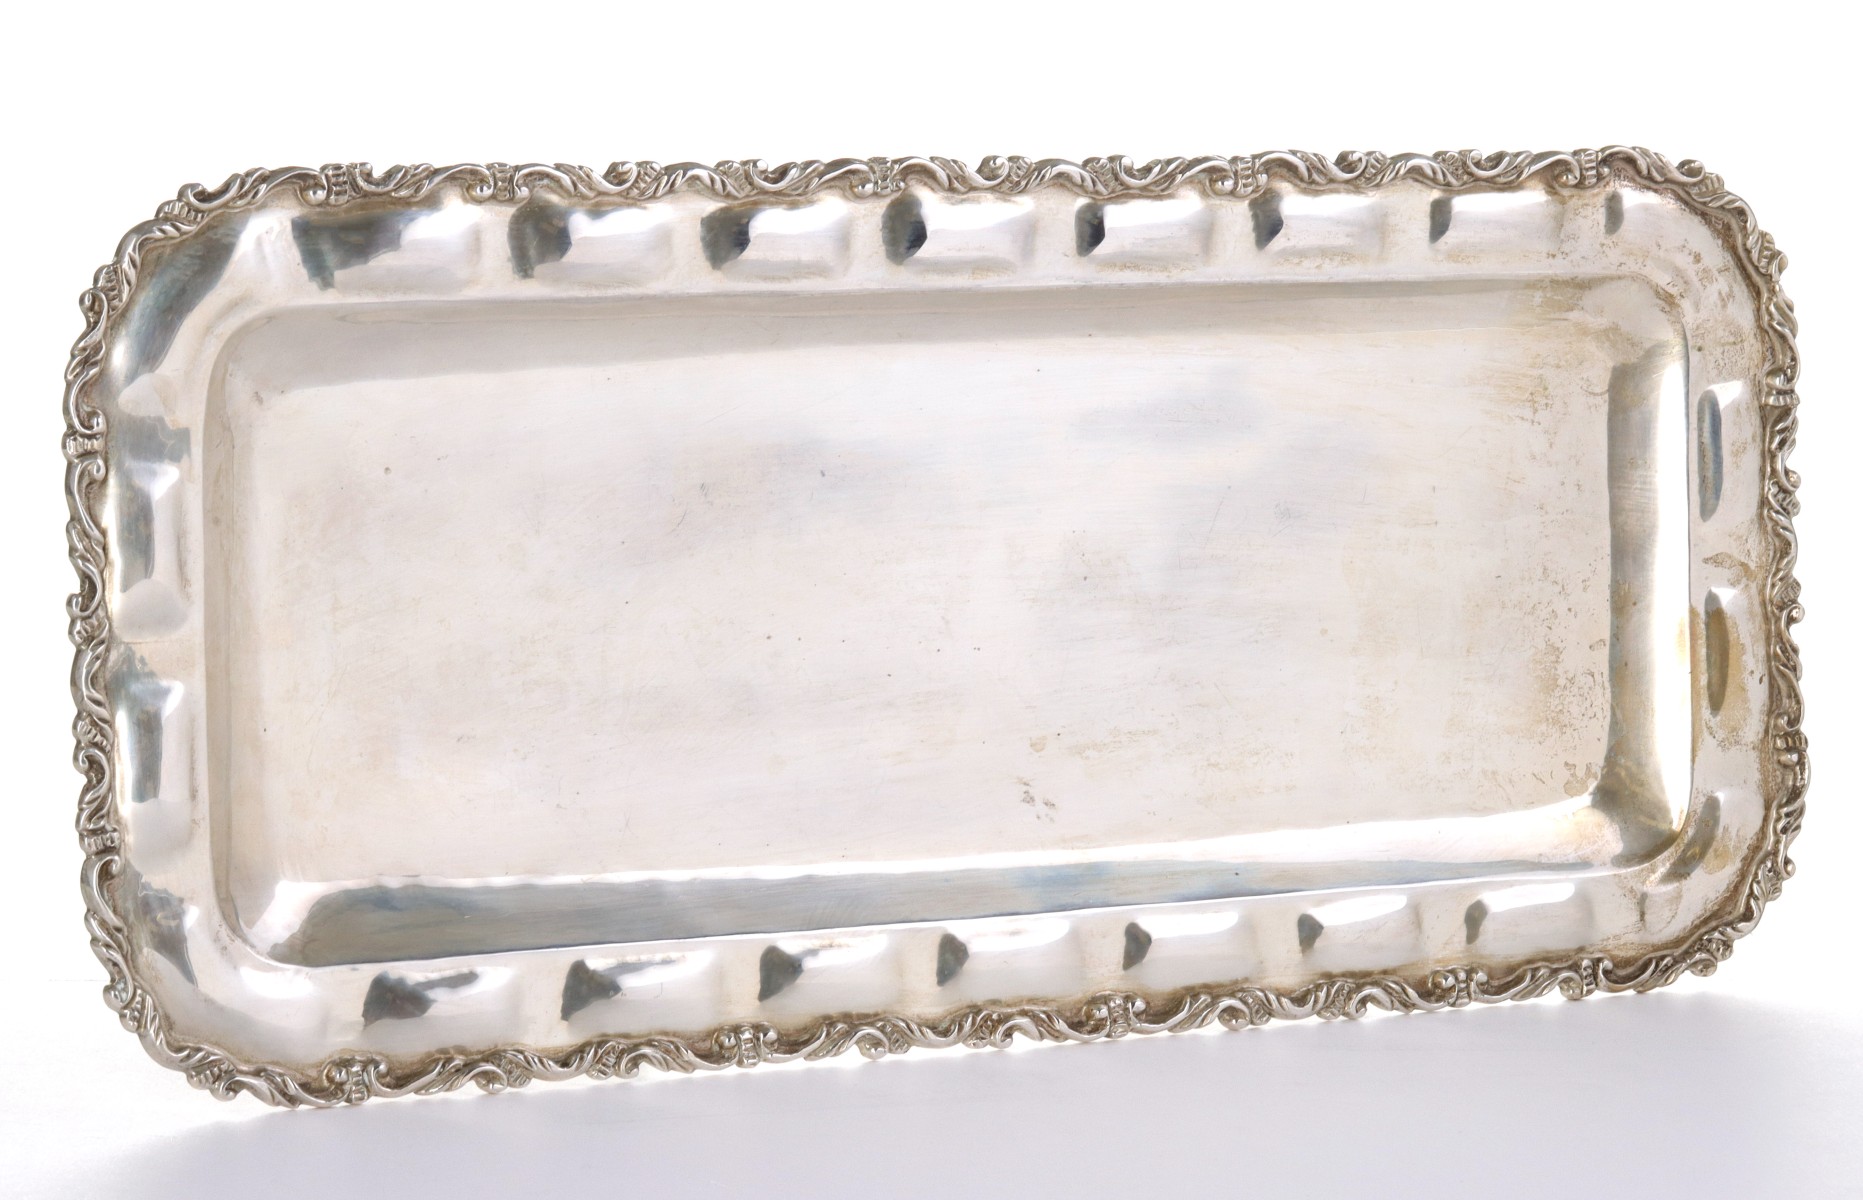 A LARGE STERLING SILVER TRAY SIGNED 352b30